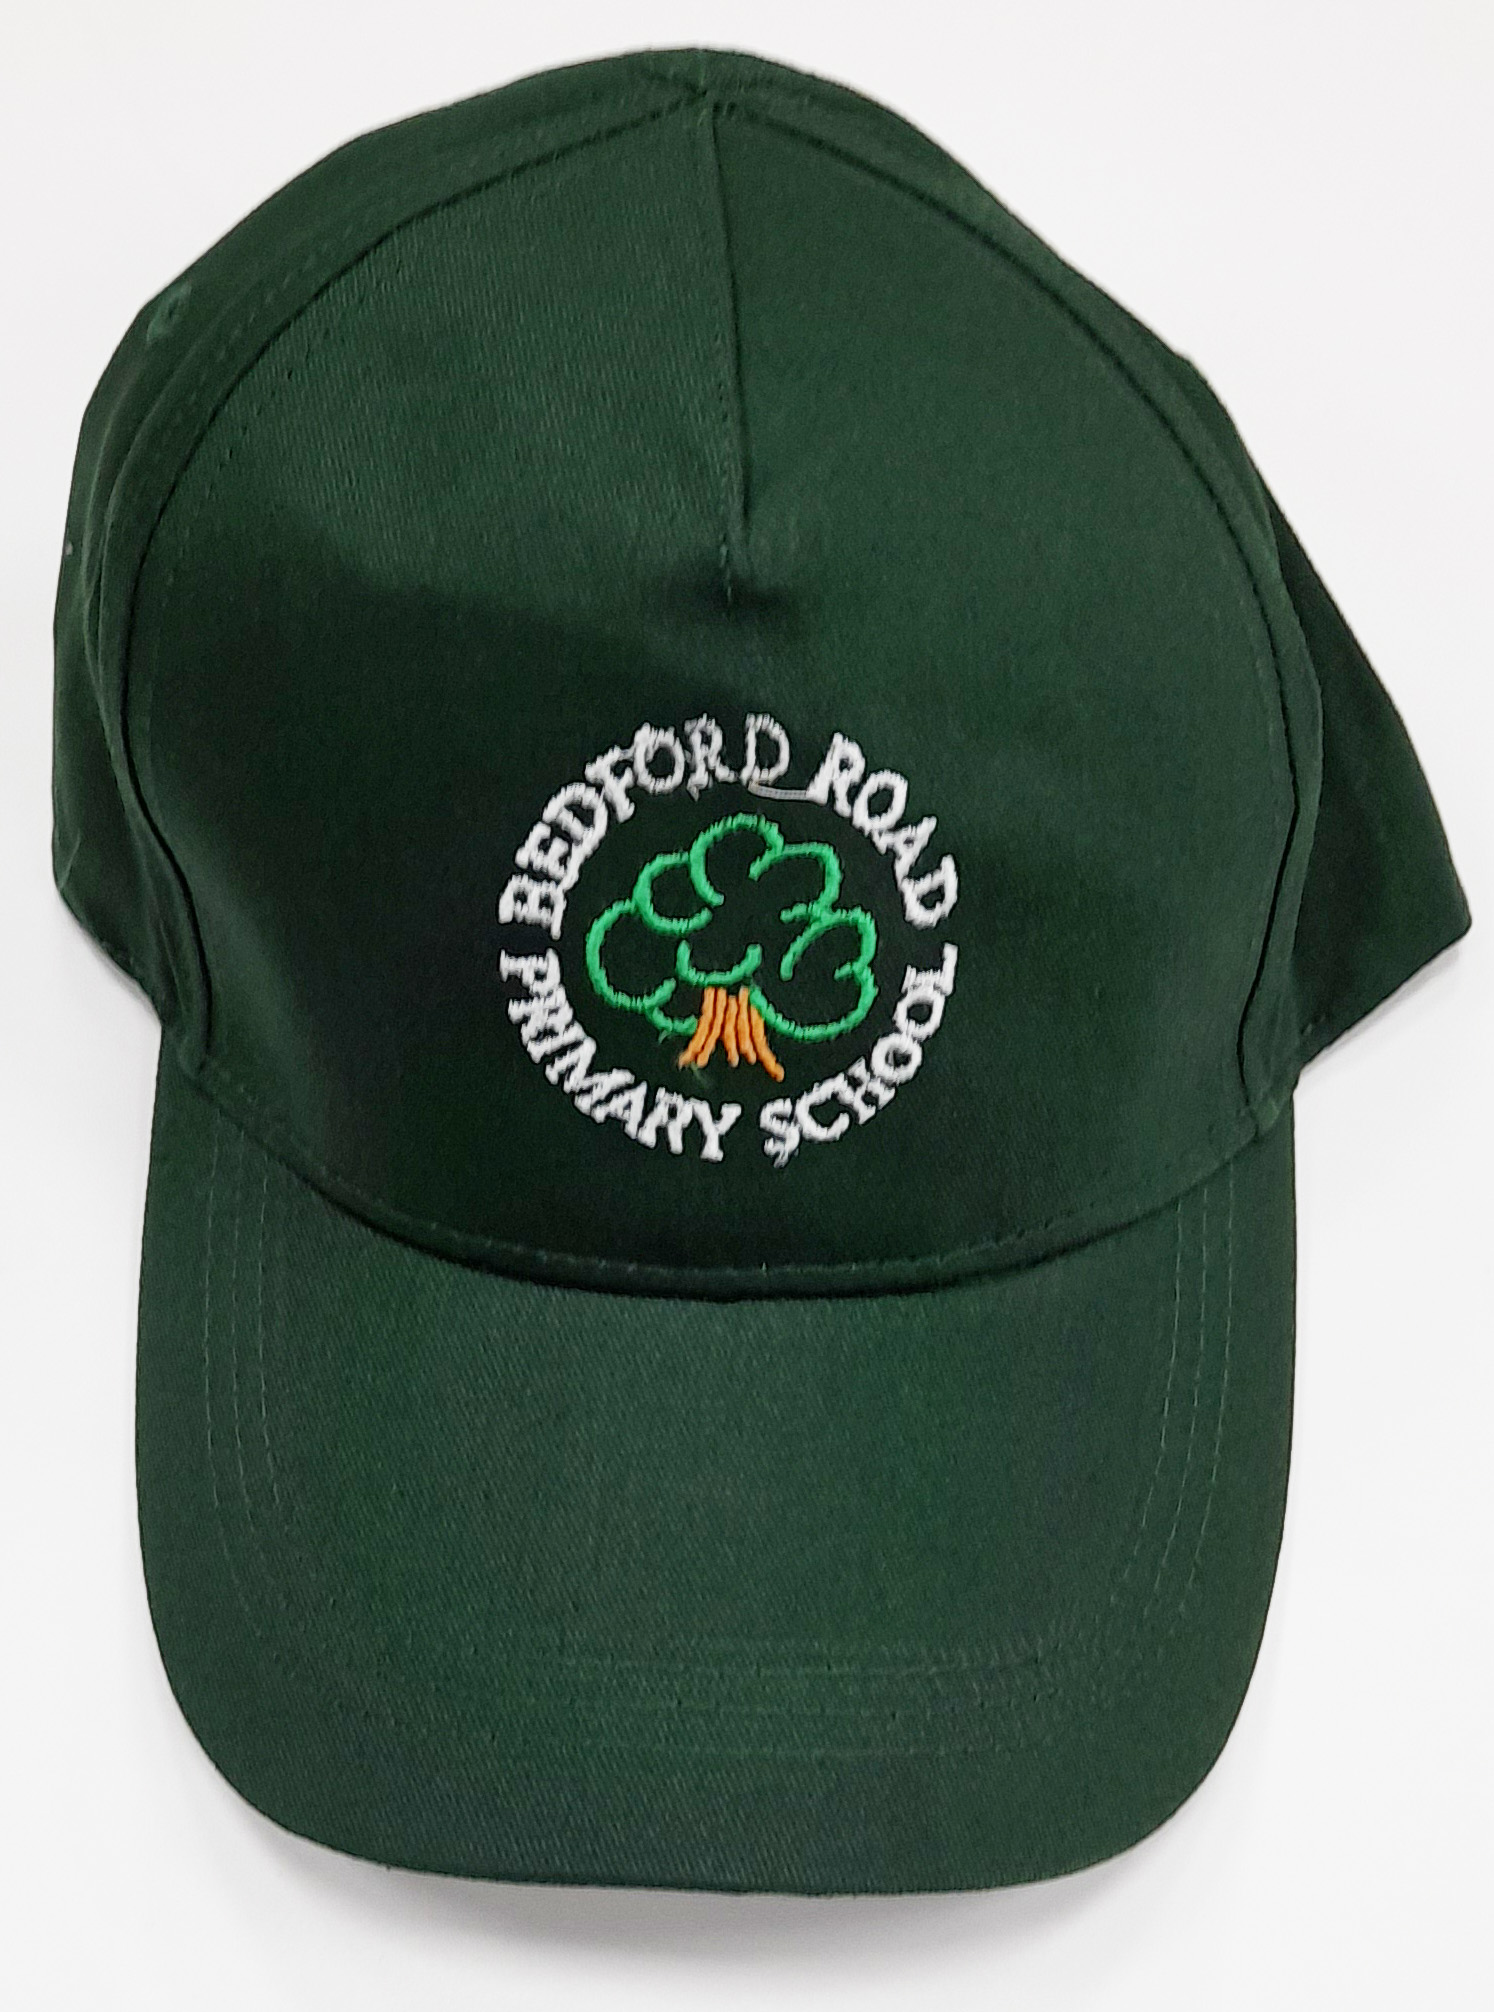 Bedford Road Primary Baseball Cap (Bottle With Logo)